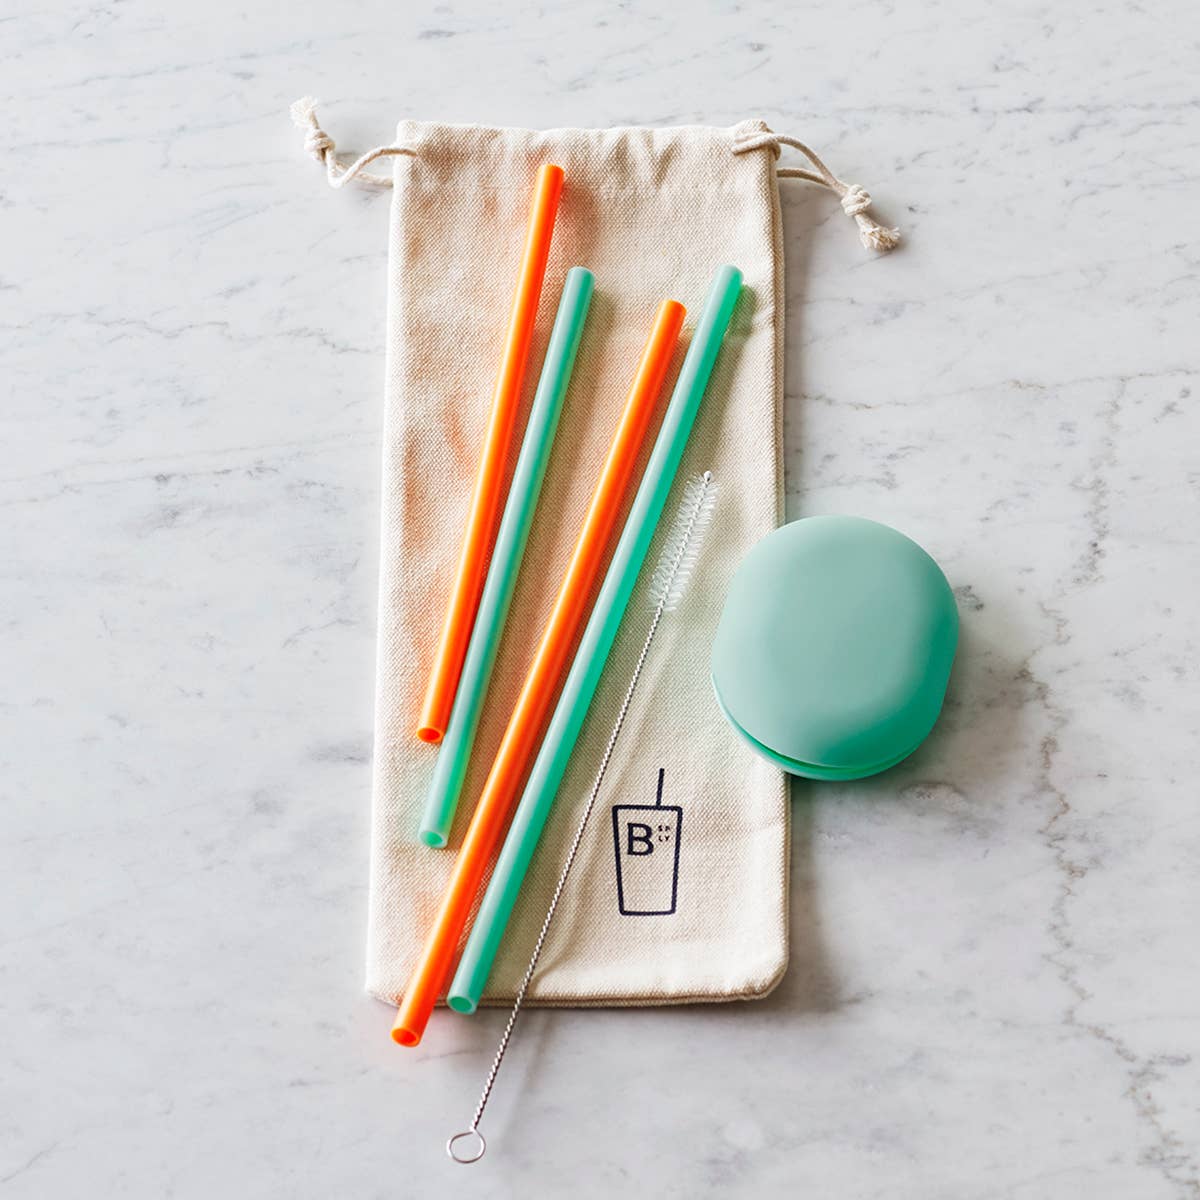 Load image into Gallery viewer, Reusable Silicone Straws Set of 4 in Pouch
